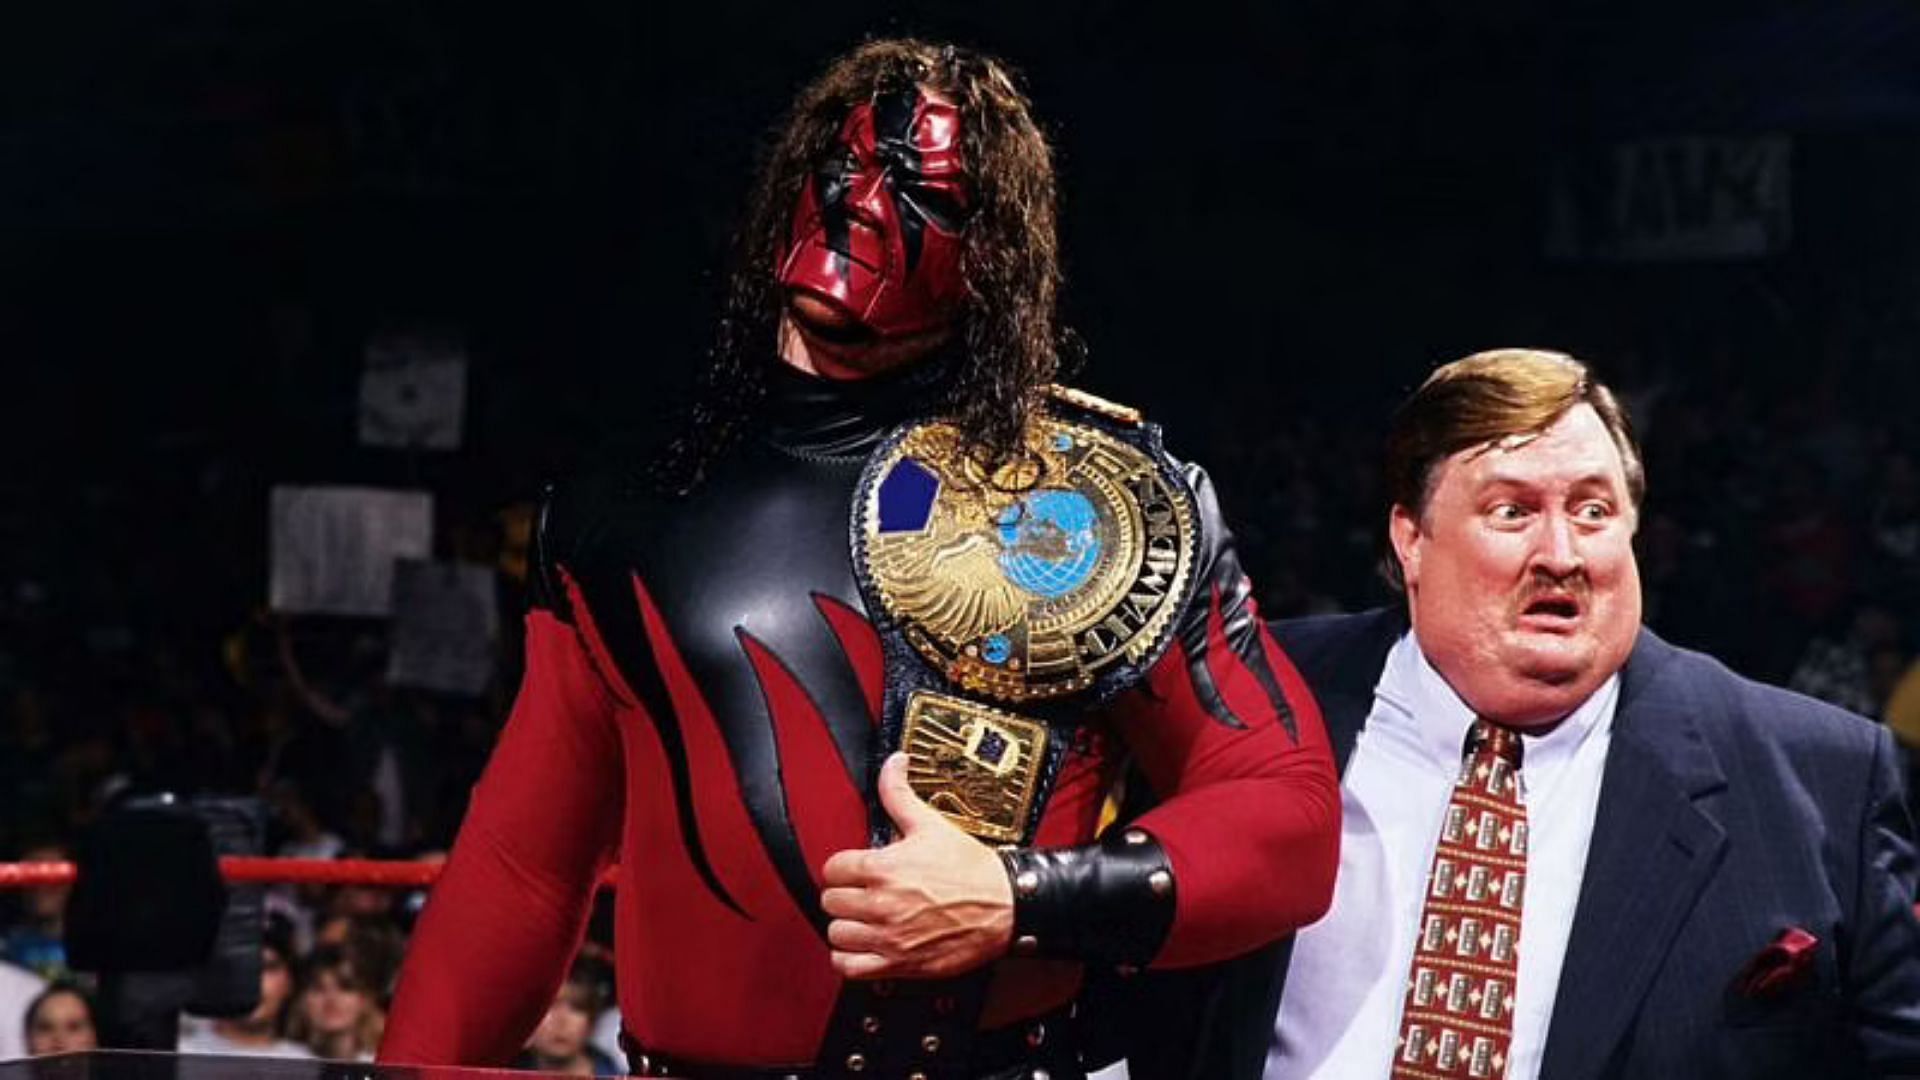 The Big Red Machine was once WWE Champion